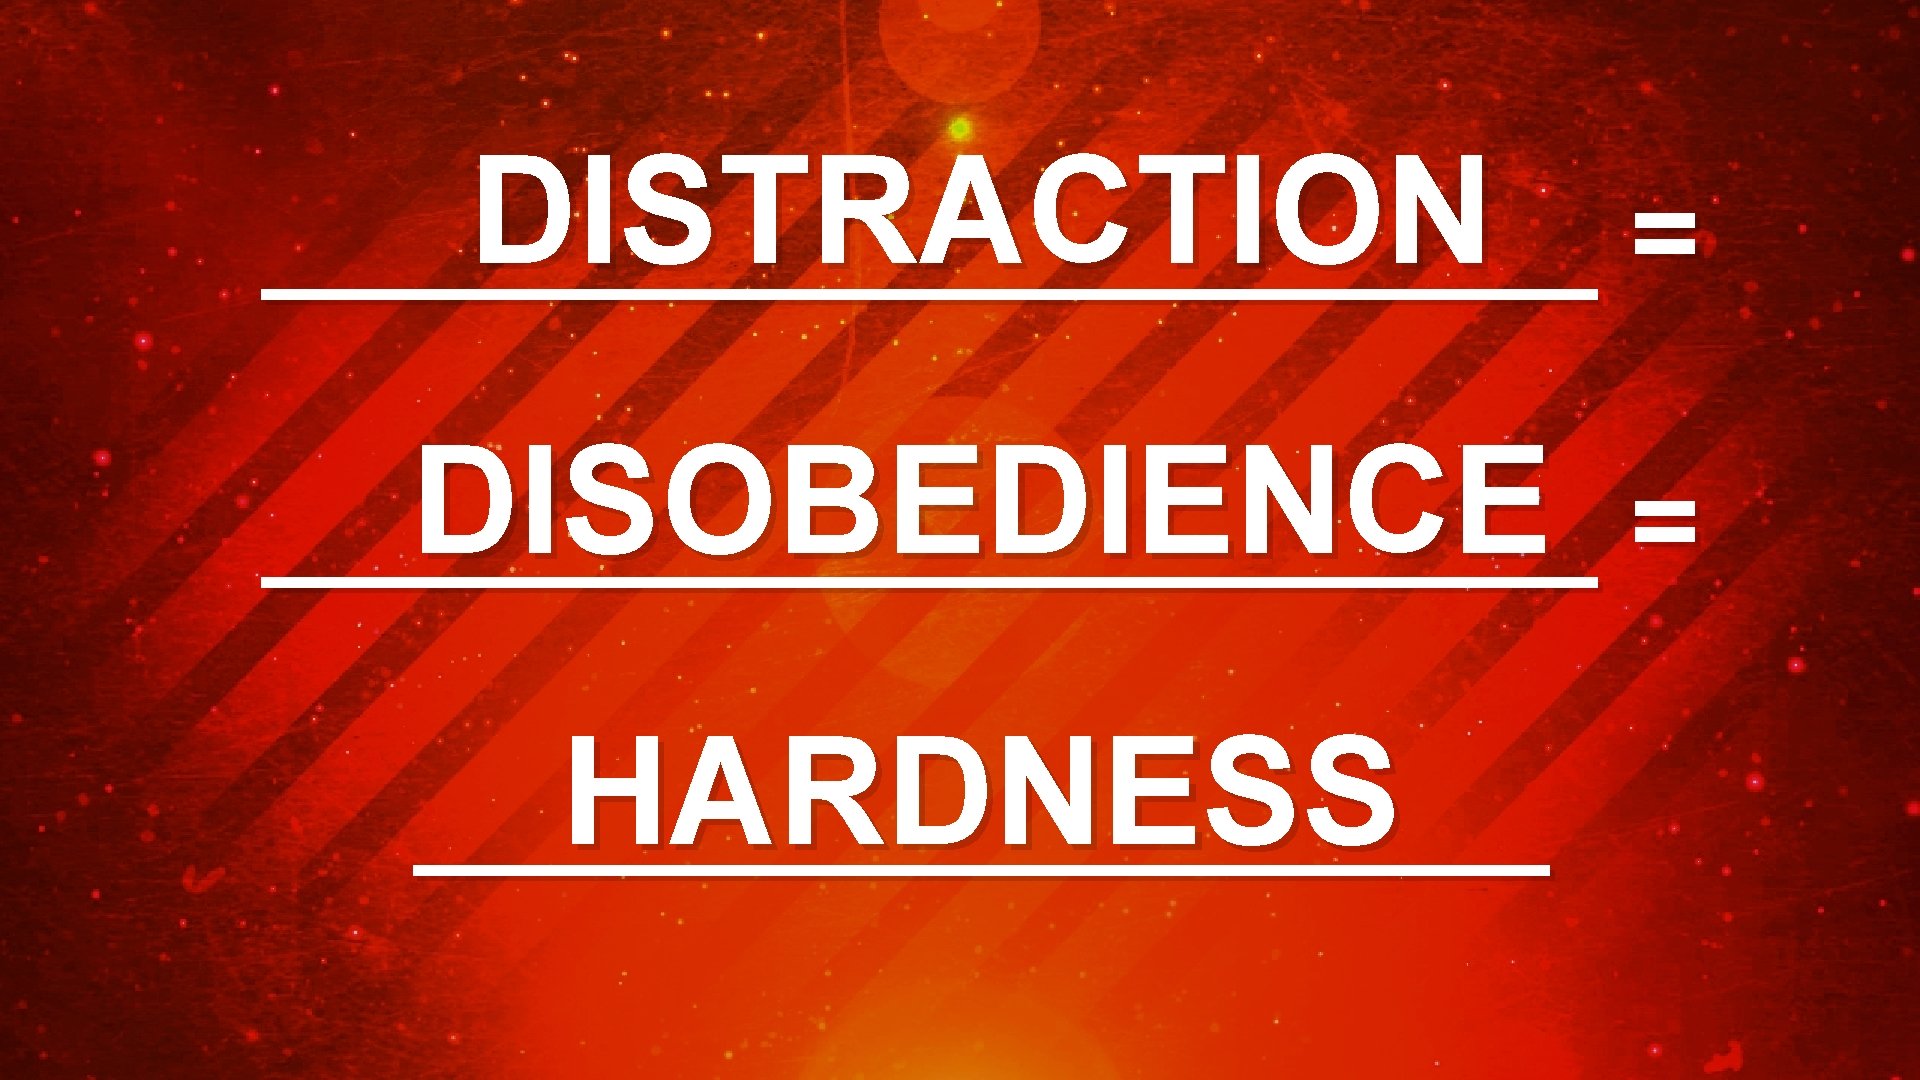 DISTRACTION = __________ DISOBEDIENCE = __________ HARDNESS _________ 